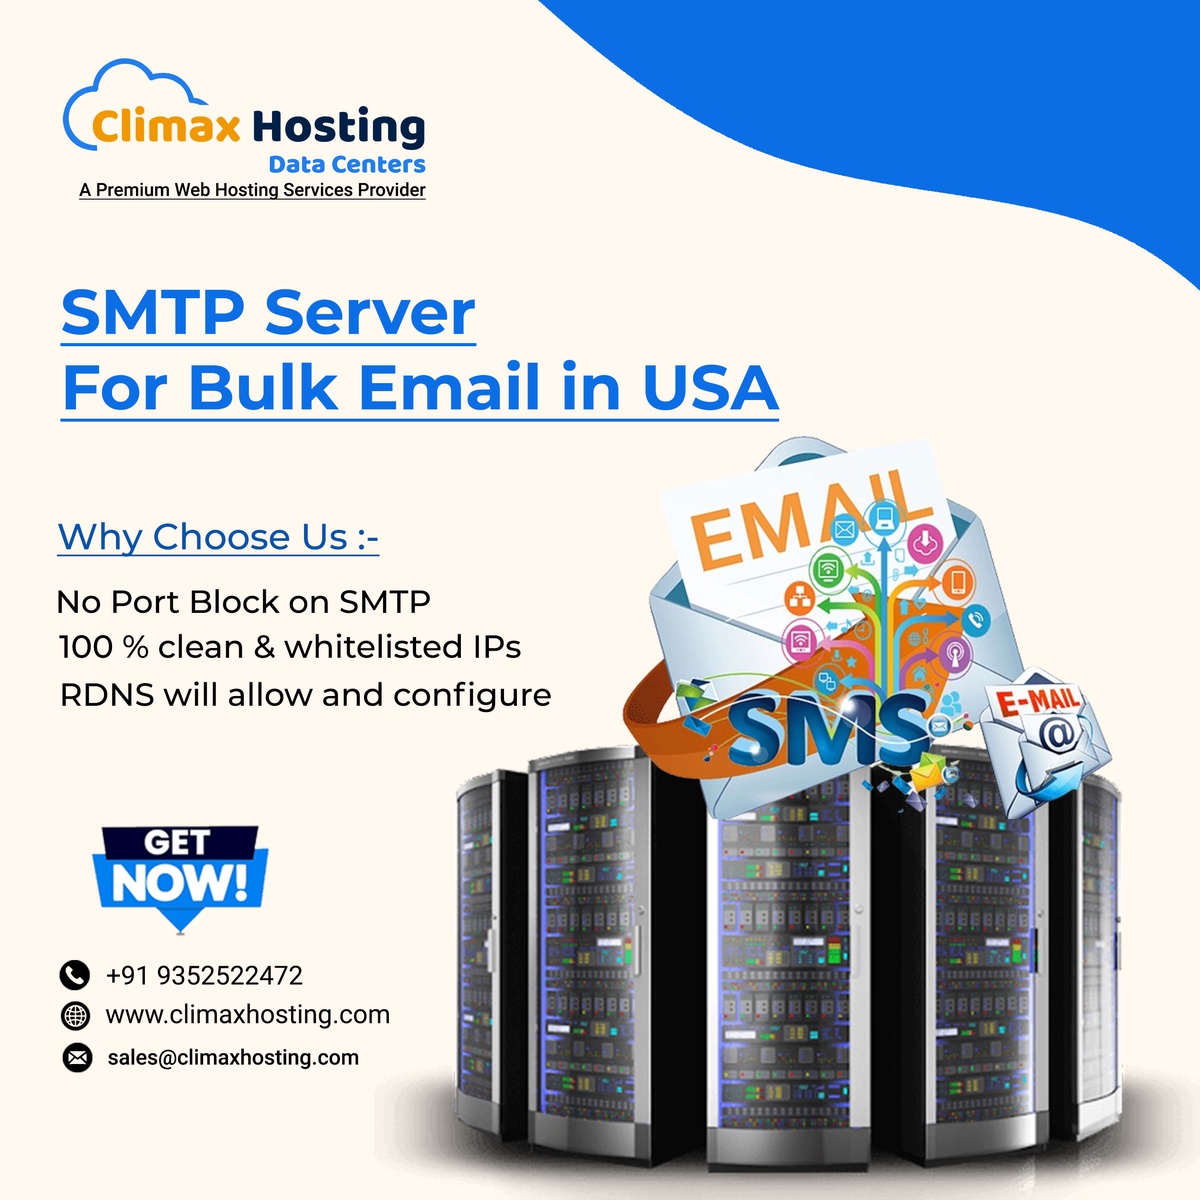 Promote your business with best SMTP server for bulk email in USA